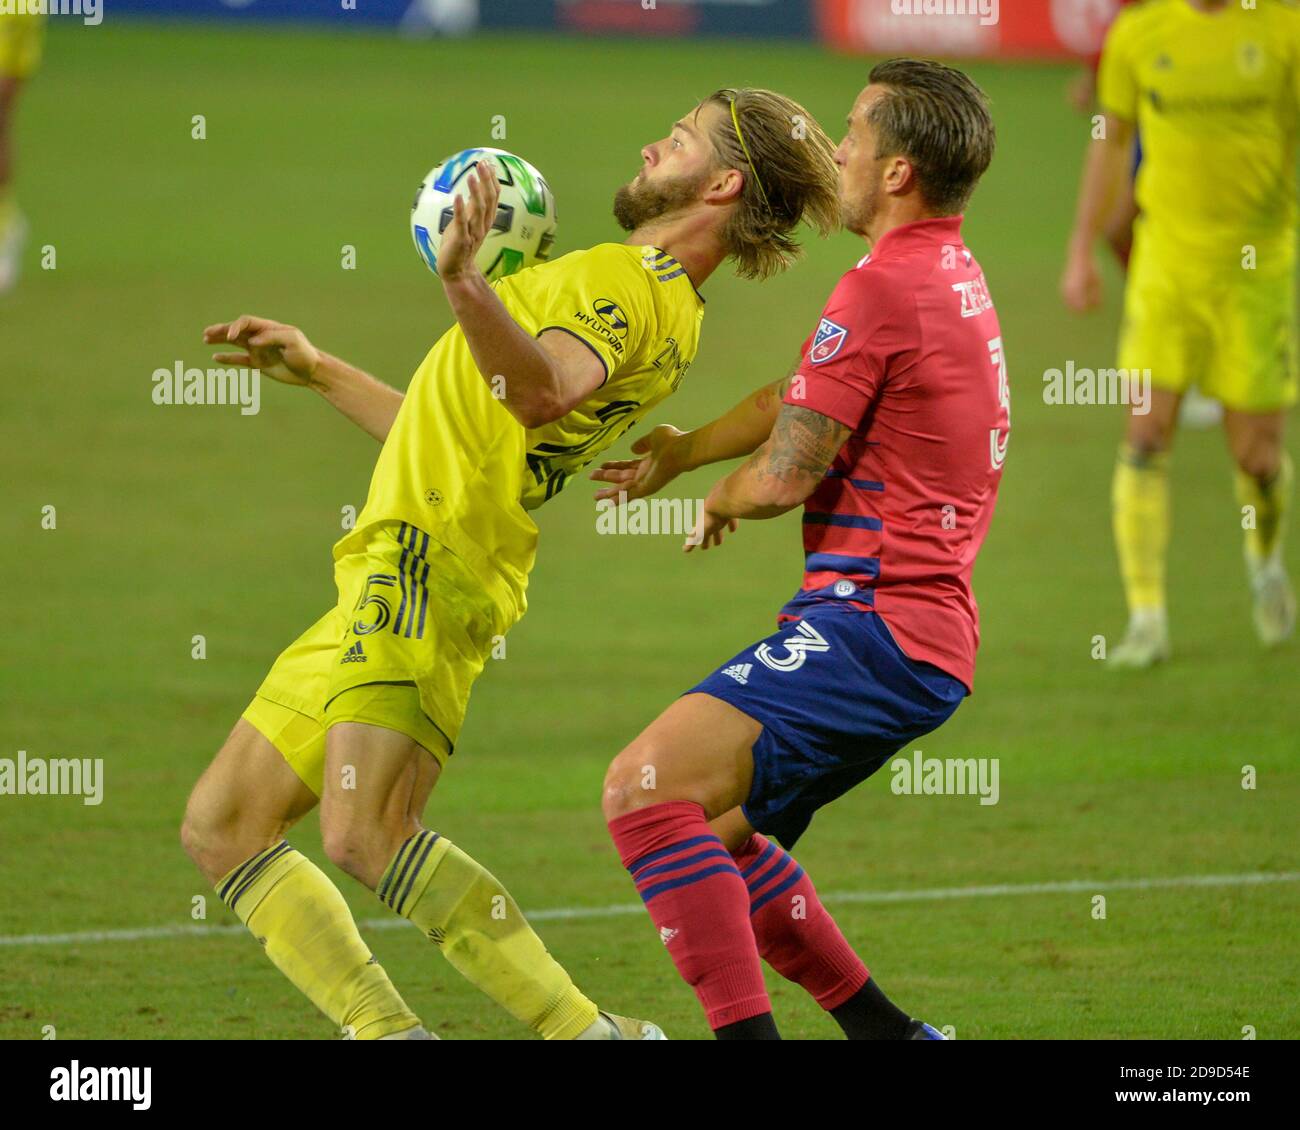 Nashville, TN, USA. 04th Nov, 2020. Nashville defender, Walker Zimmerman (25), traps the ball as Dallas defender, Reto Ziegler (3), waits for the ball during the MLS match between FC Dallas and Nashville SC at Nissan Stadium in Nashville, TN. Kevin Langley/CSM/Alamy Live News Stock Photo